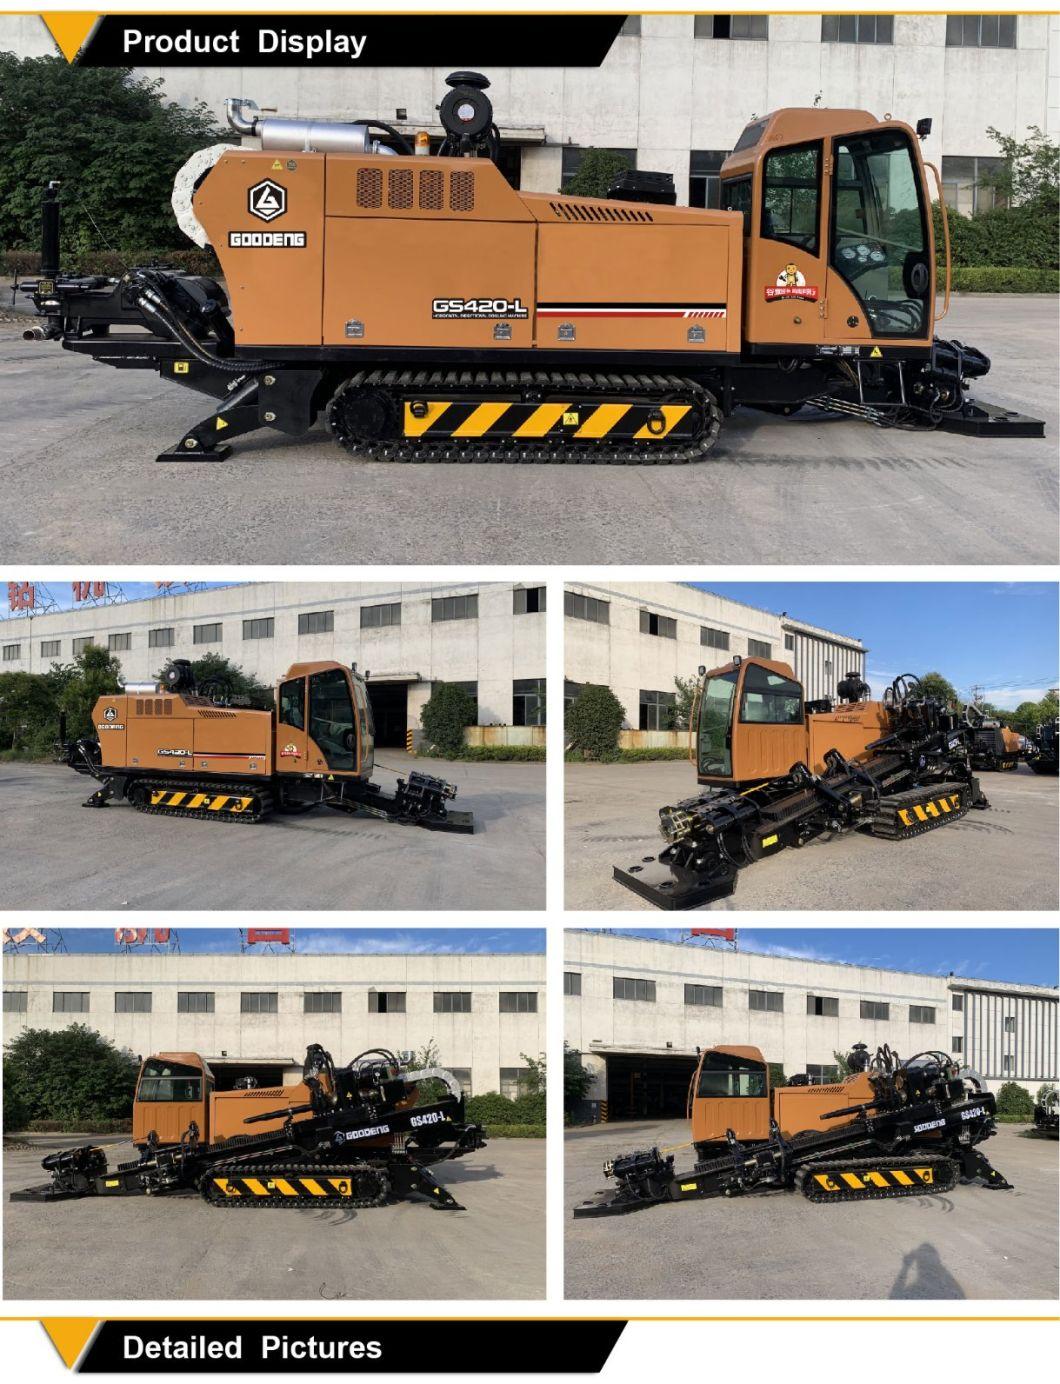 Goodeng small series GS420-LS HDD Trenchless machine